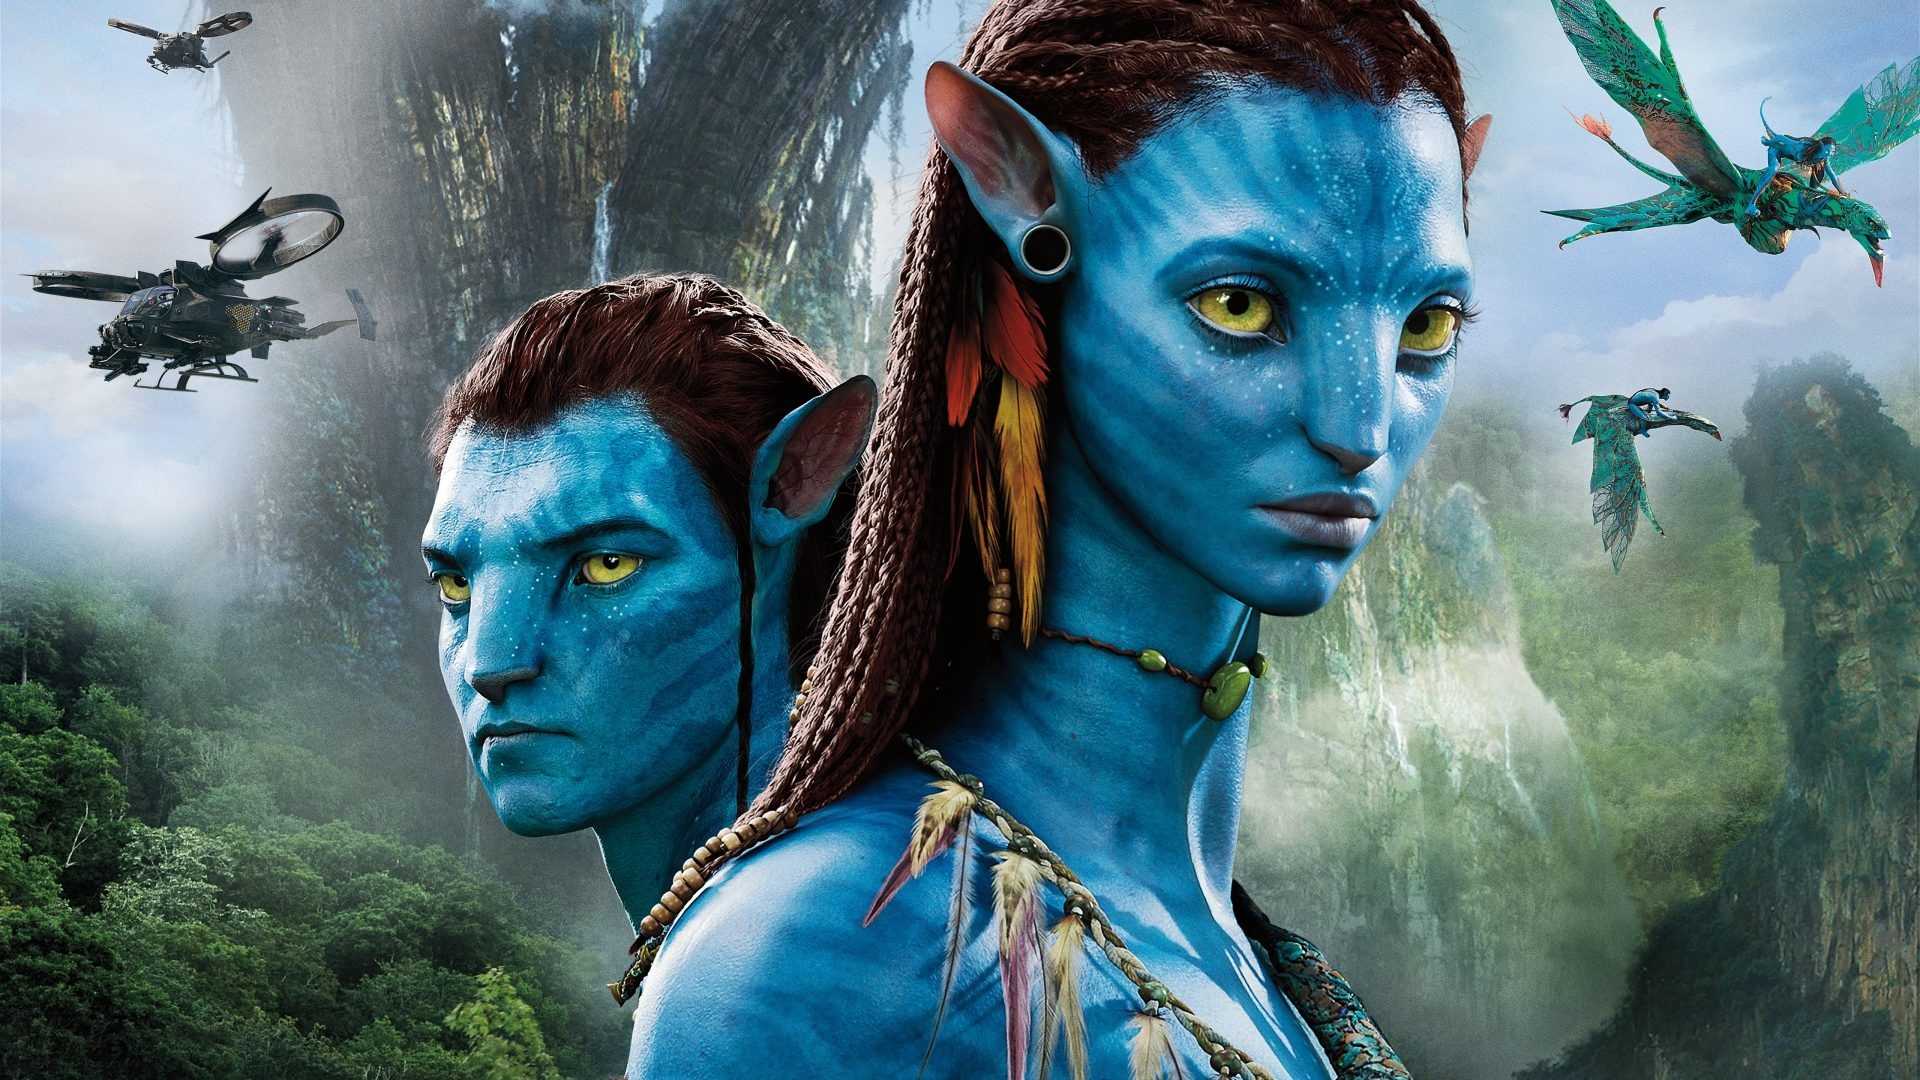 Avatar: The Way of Water - check out these stunning pictures from James Cameron's highly anticipated sequel